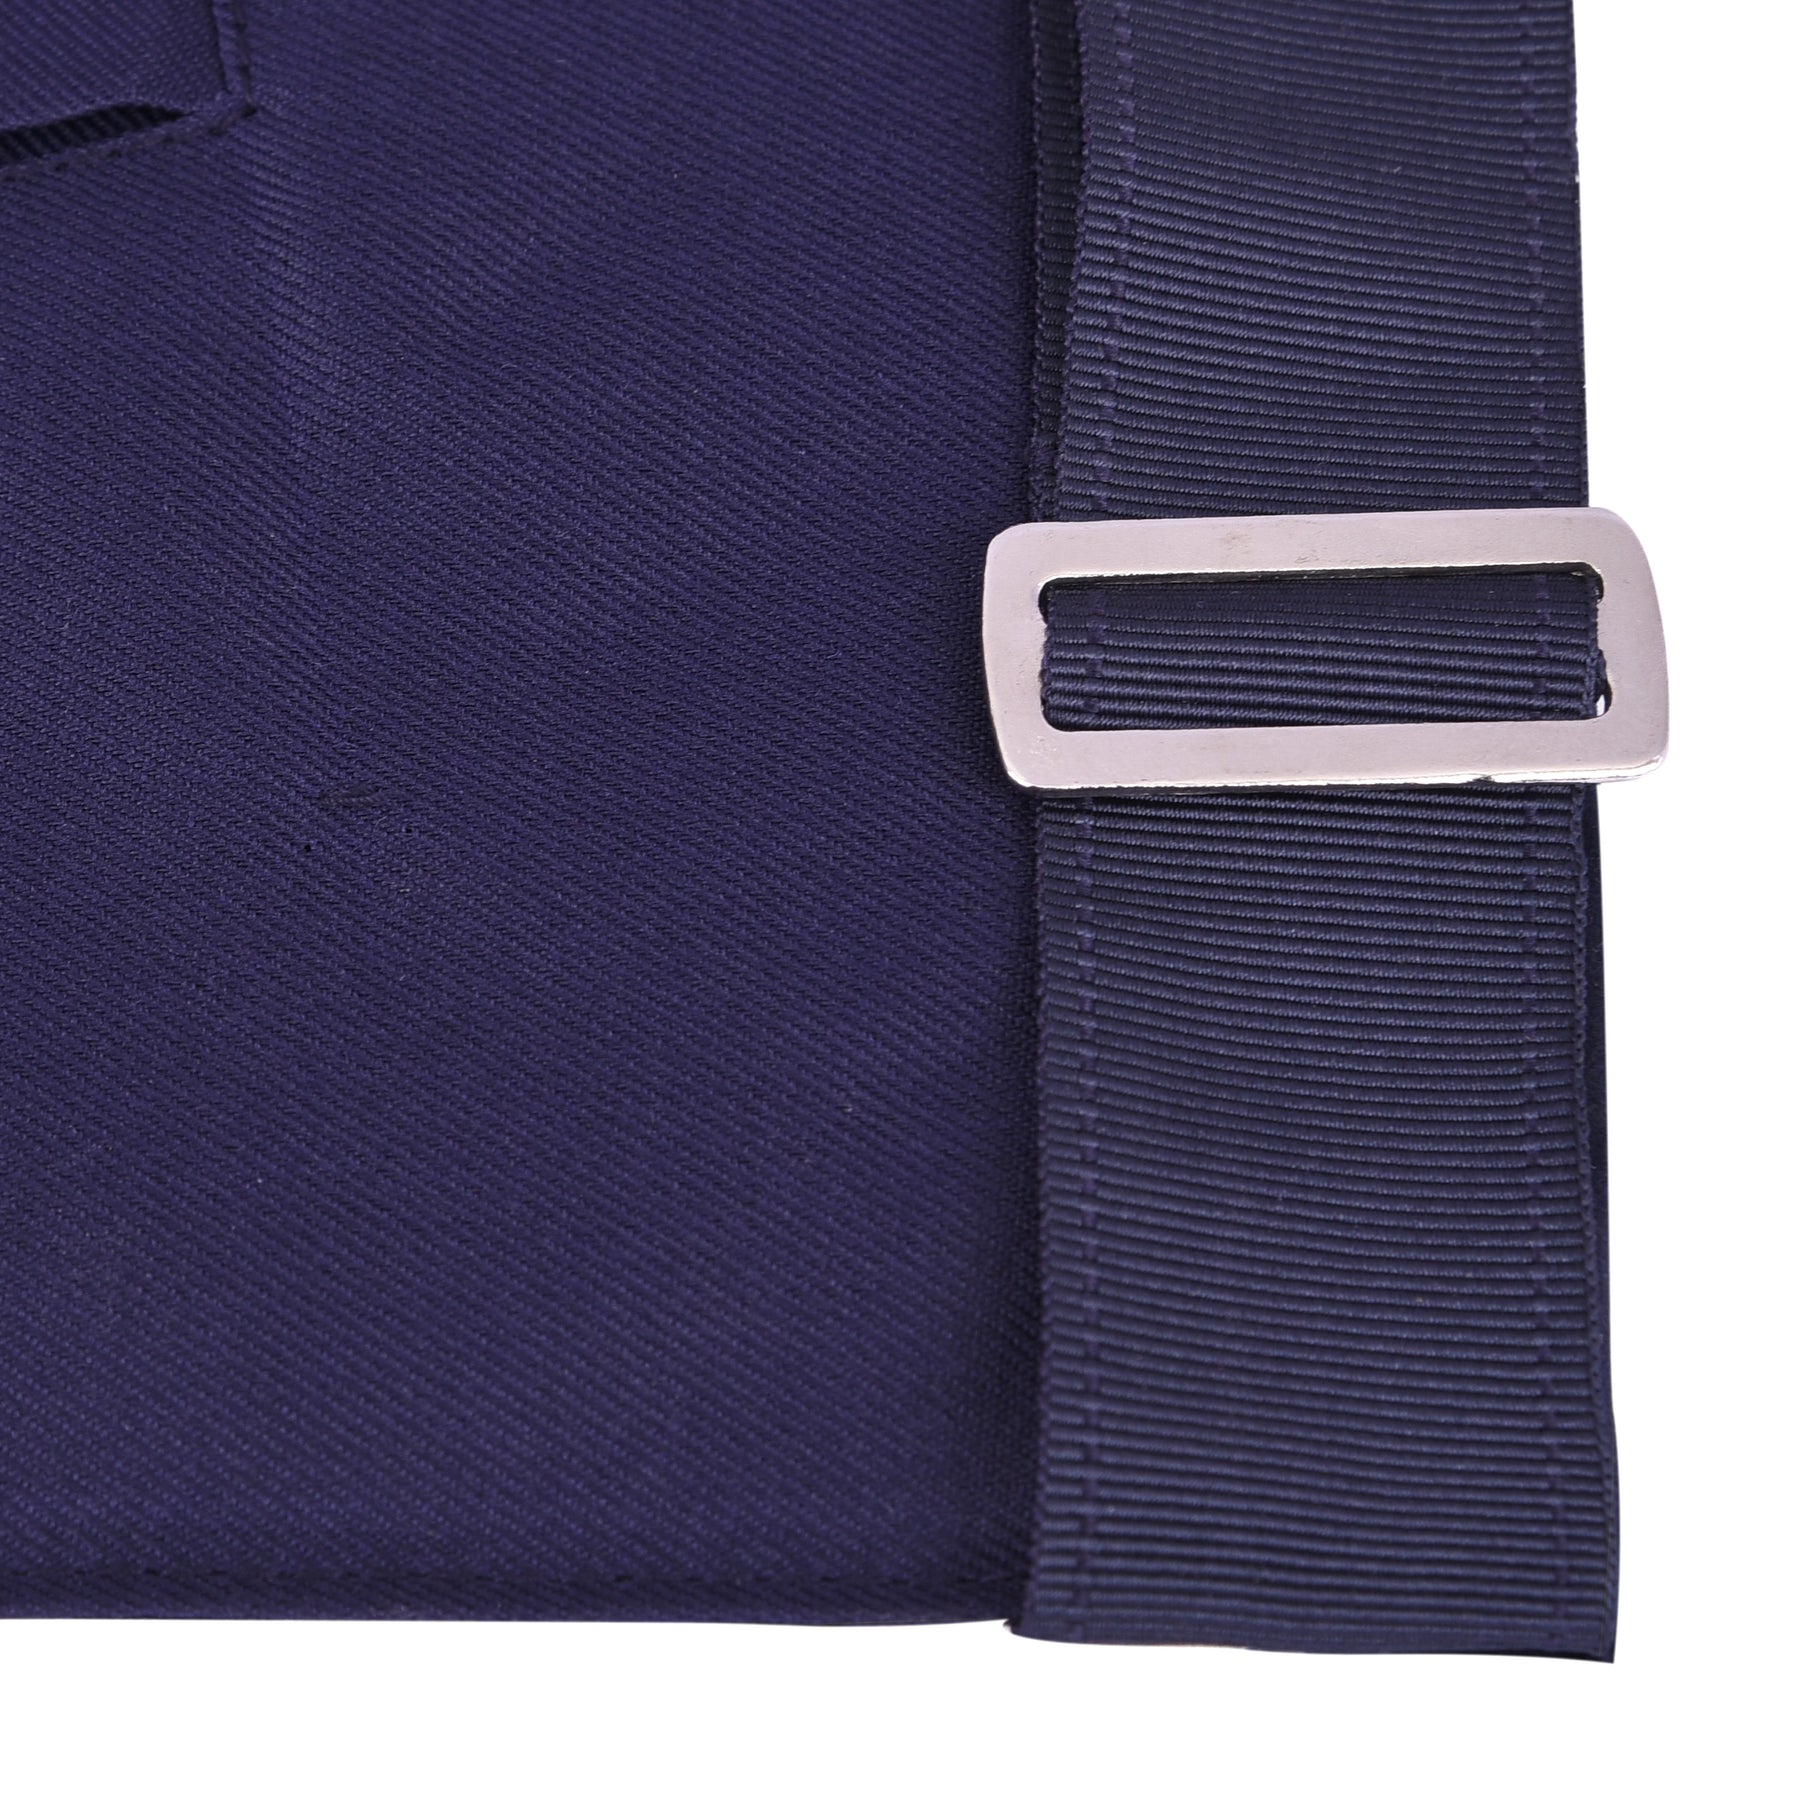 Marshal Blue Lodge Officer Apron -  Navy Velvet With Silver Embroidery Thread